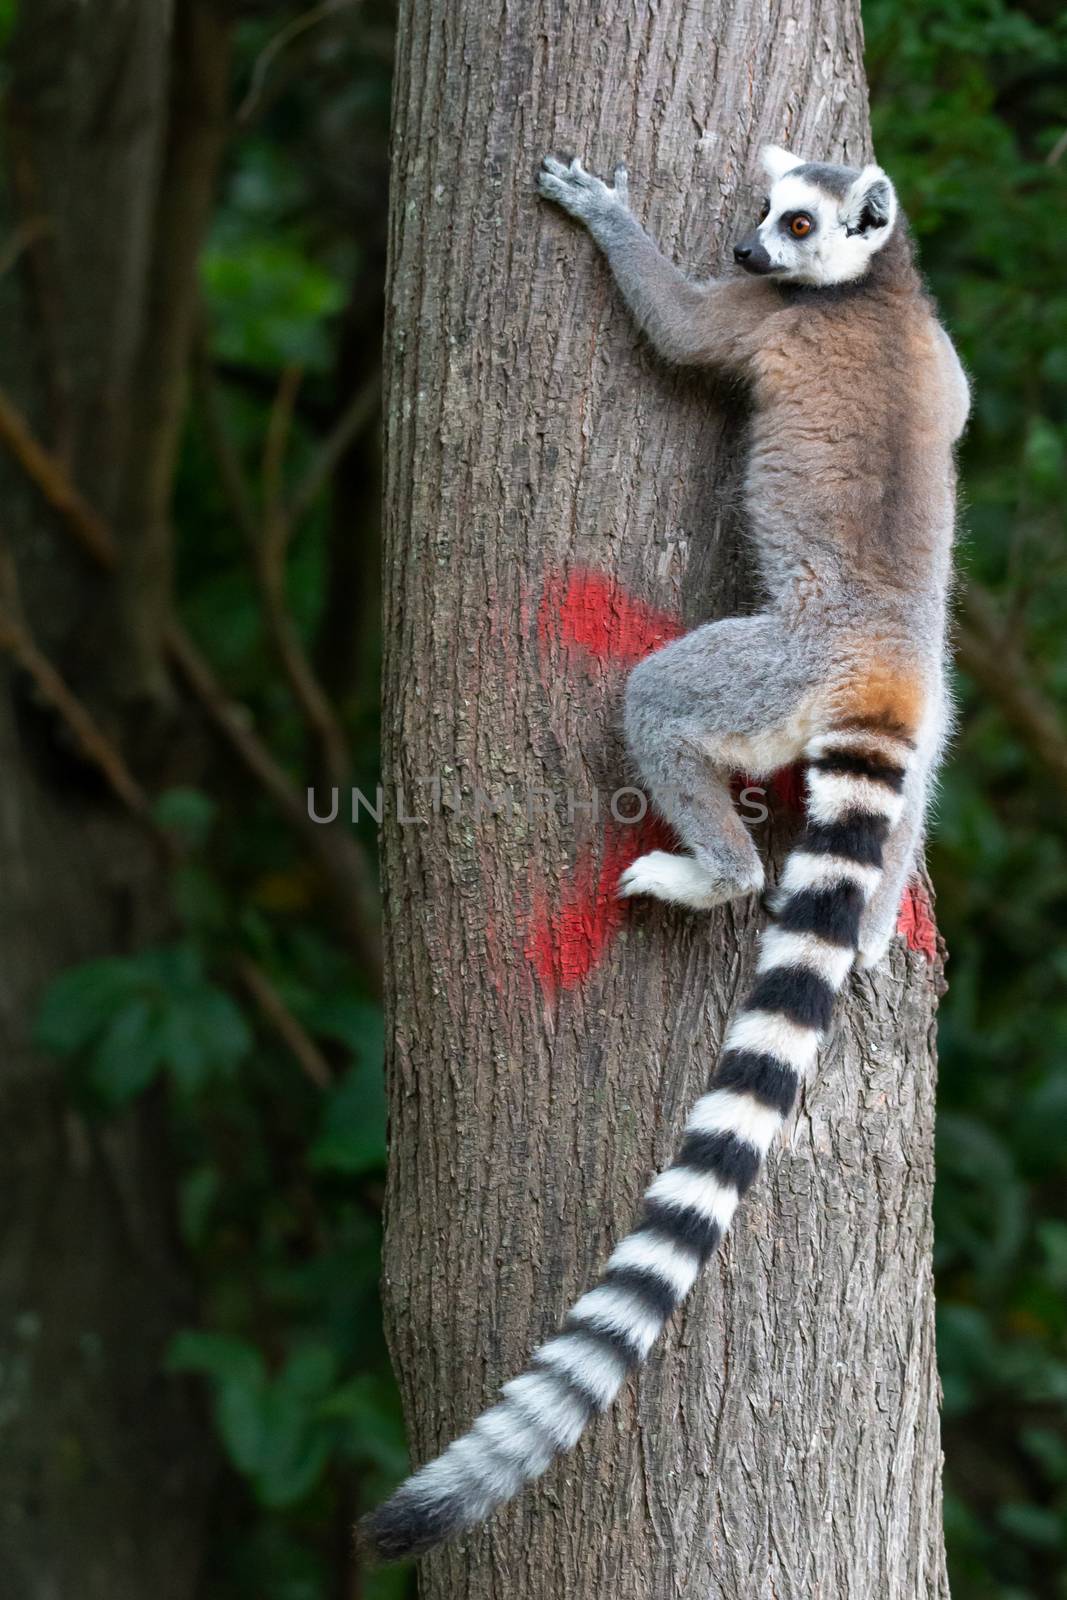 A ring-tailed lemur climbs a tree trunk by 25ehaag6